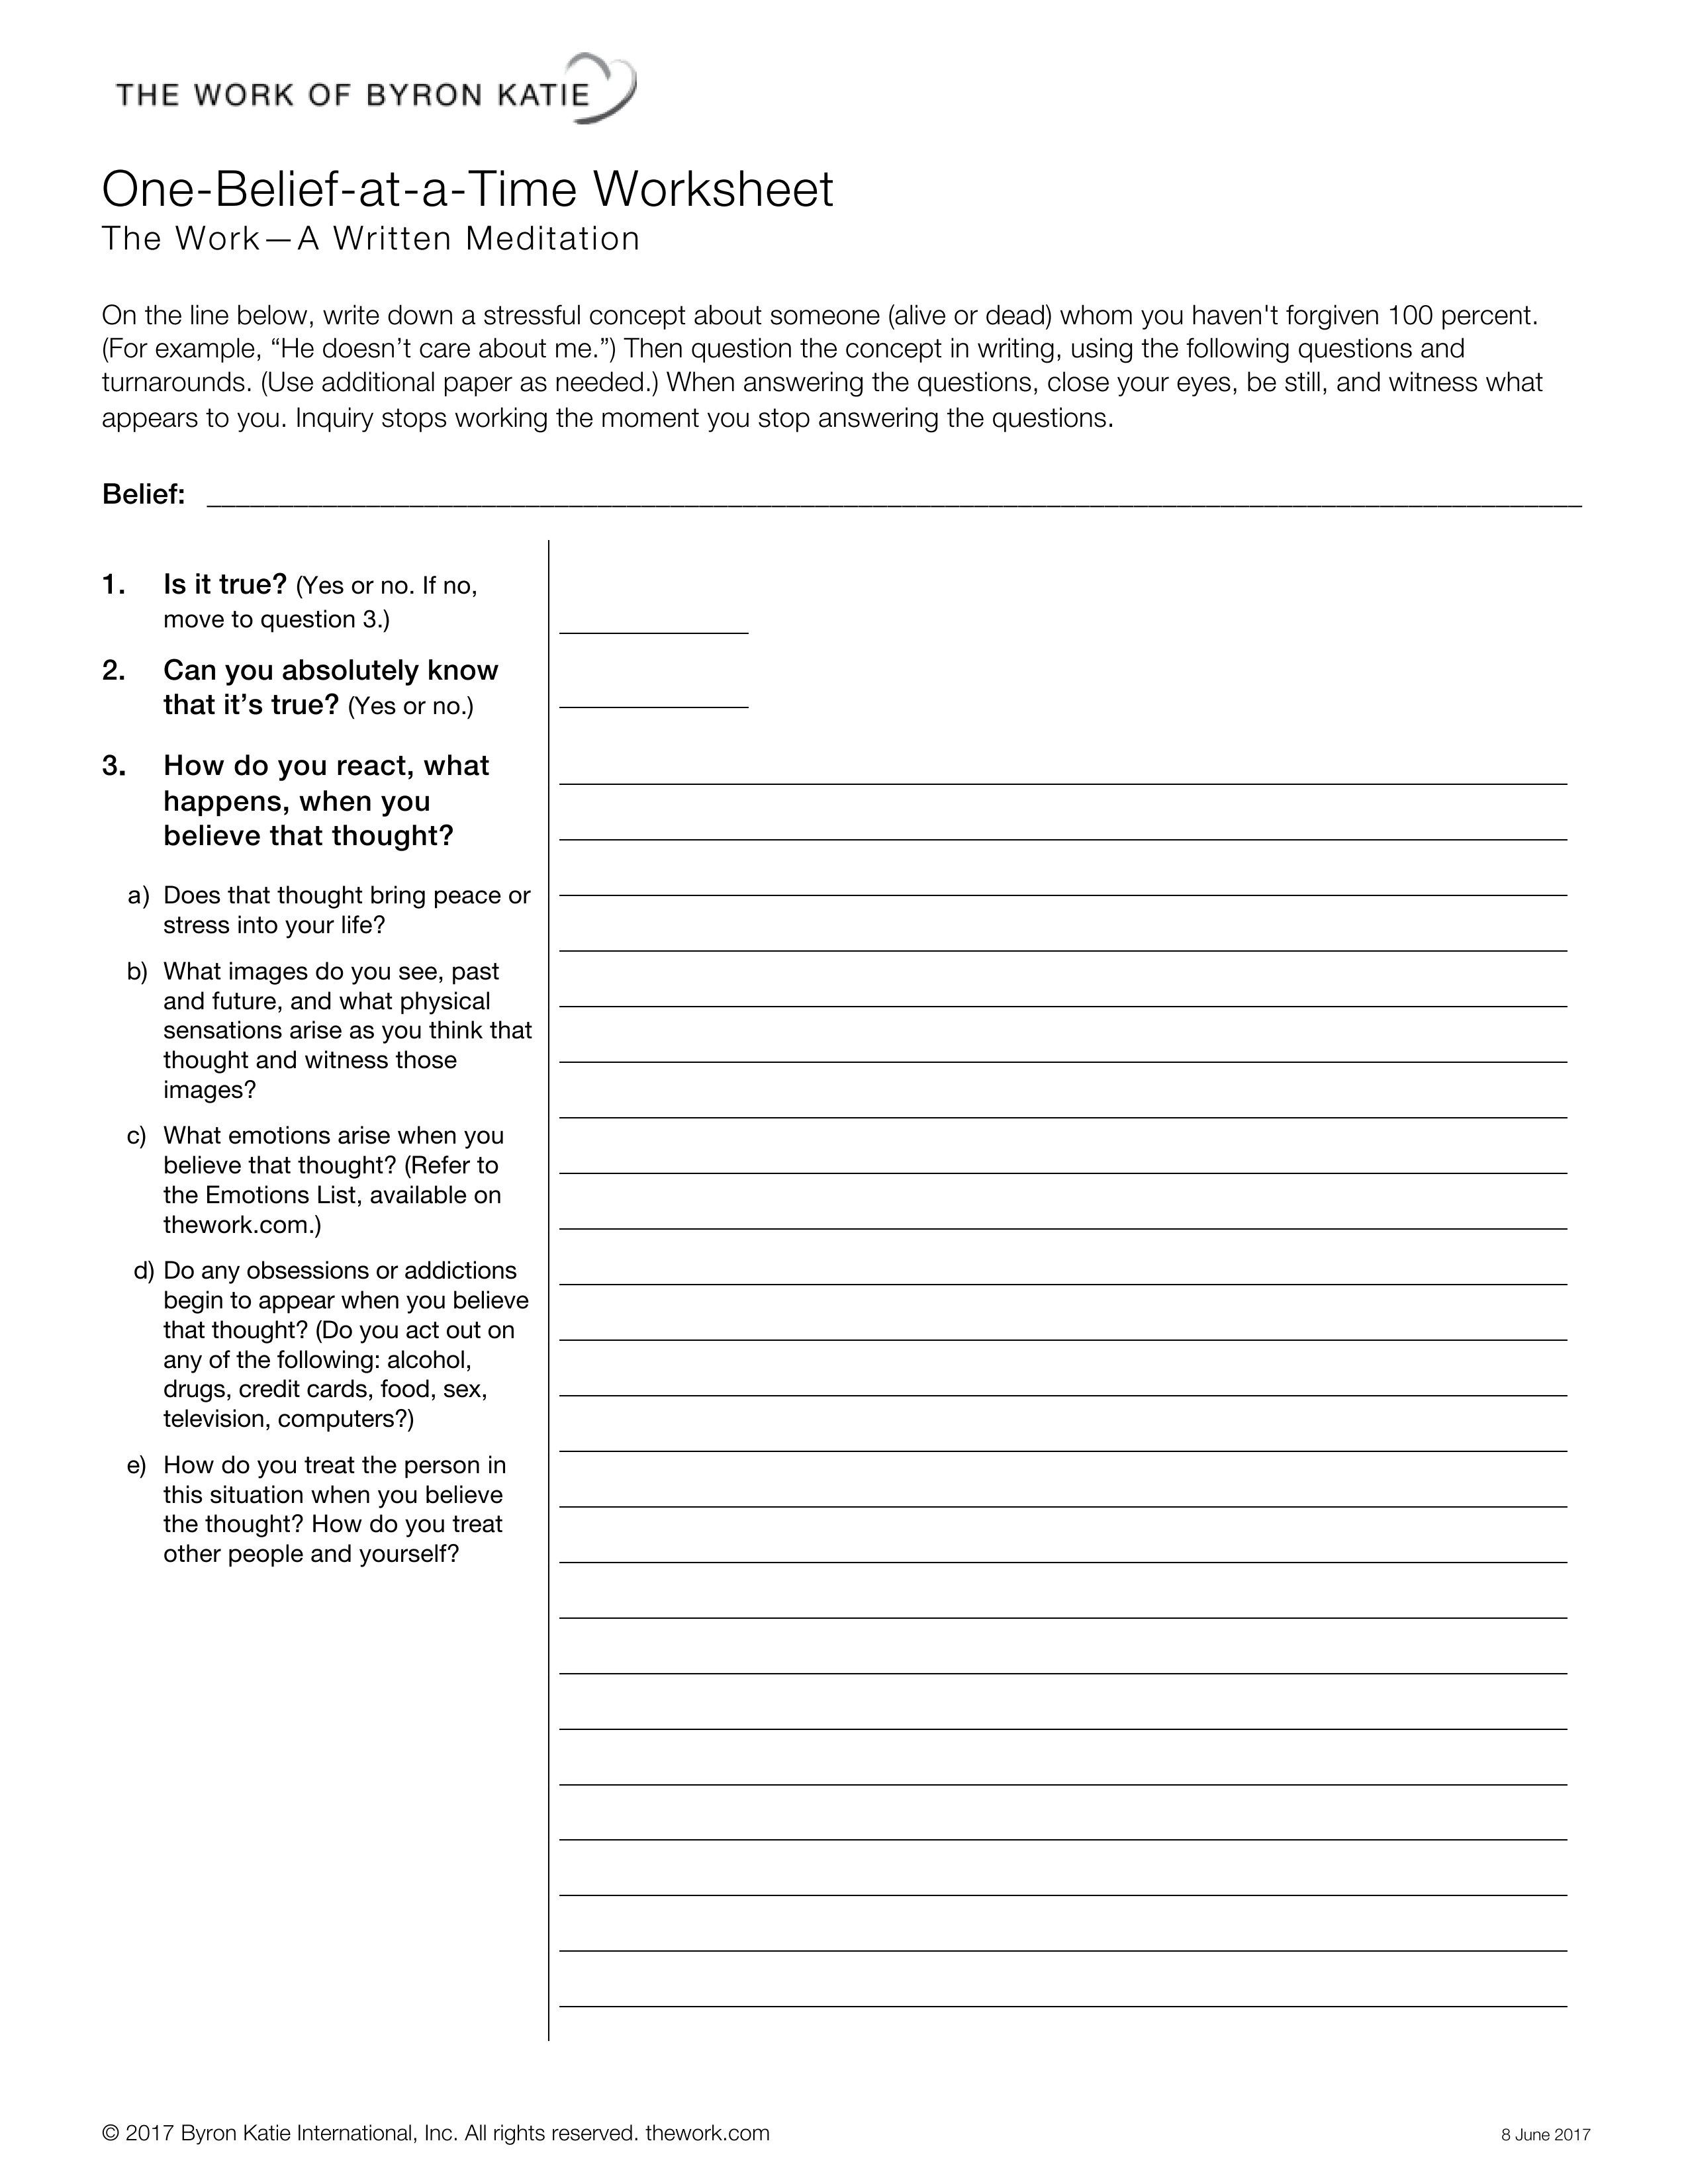 One belief at a time worksheet